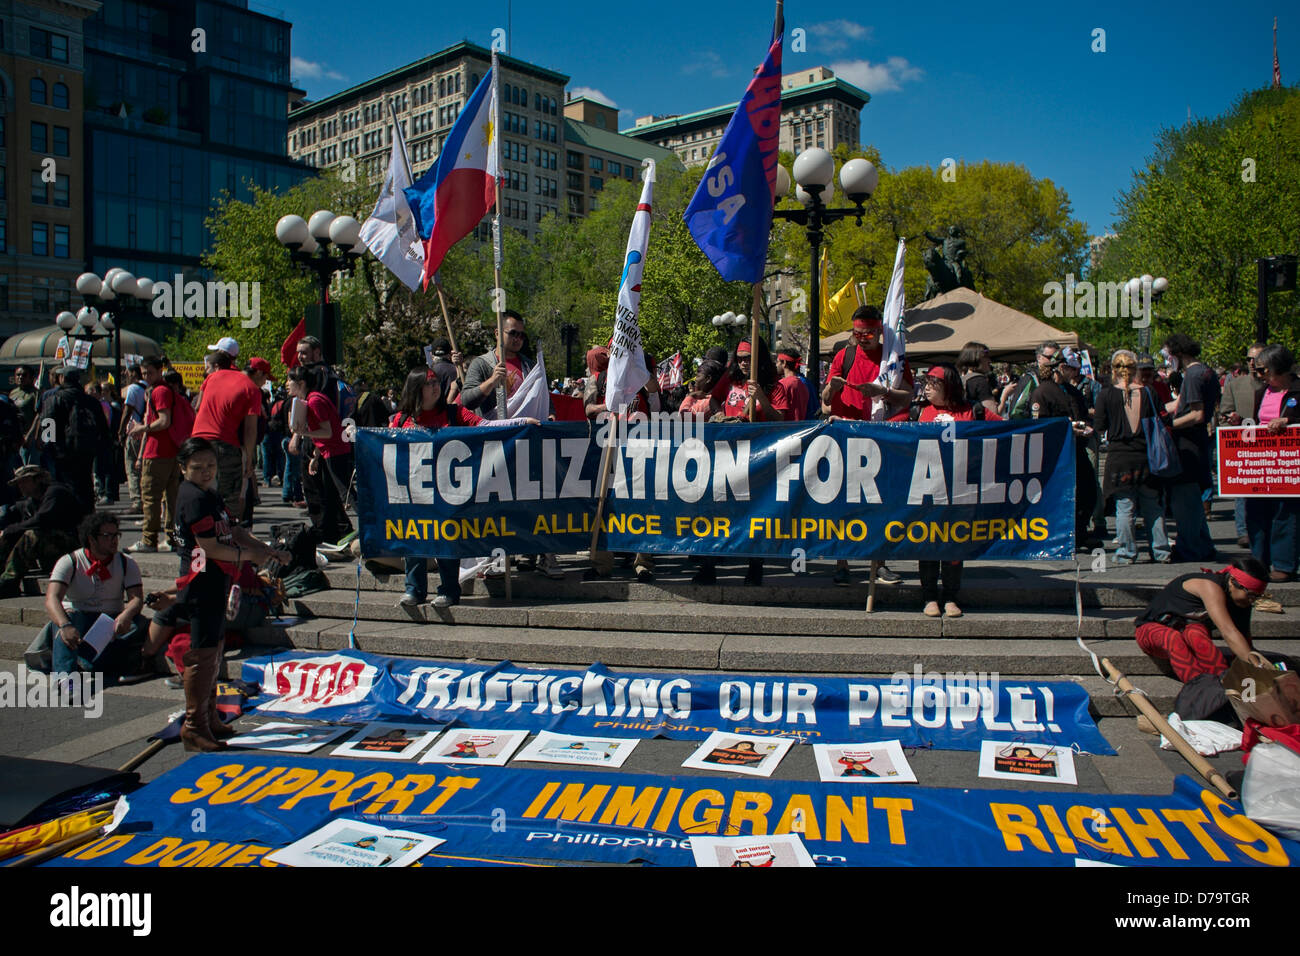 Wednesday, May 1, 2013, New York, NY, US:  Protesters gather in New York's Union Square to mark  International Workers' Day, also known as May Day.  One group, the National Alliance for Filipino Concerns, held a sign calling for legalization of undocumented workers in the U.S. Stock Photo